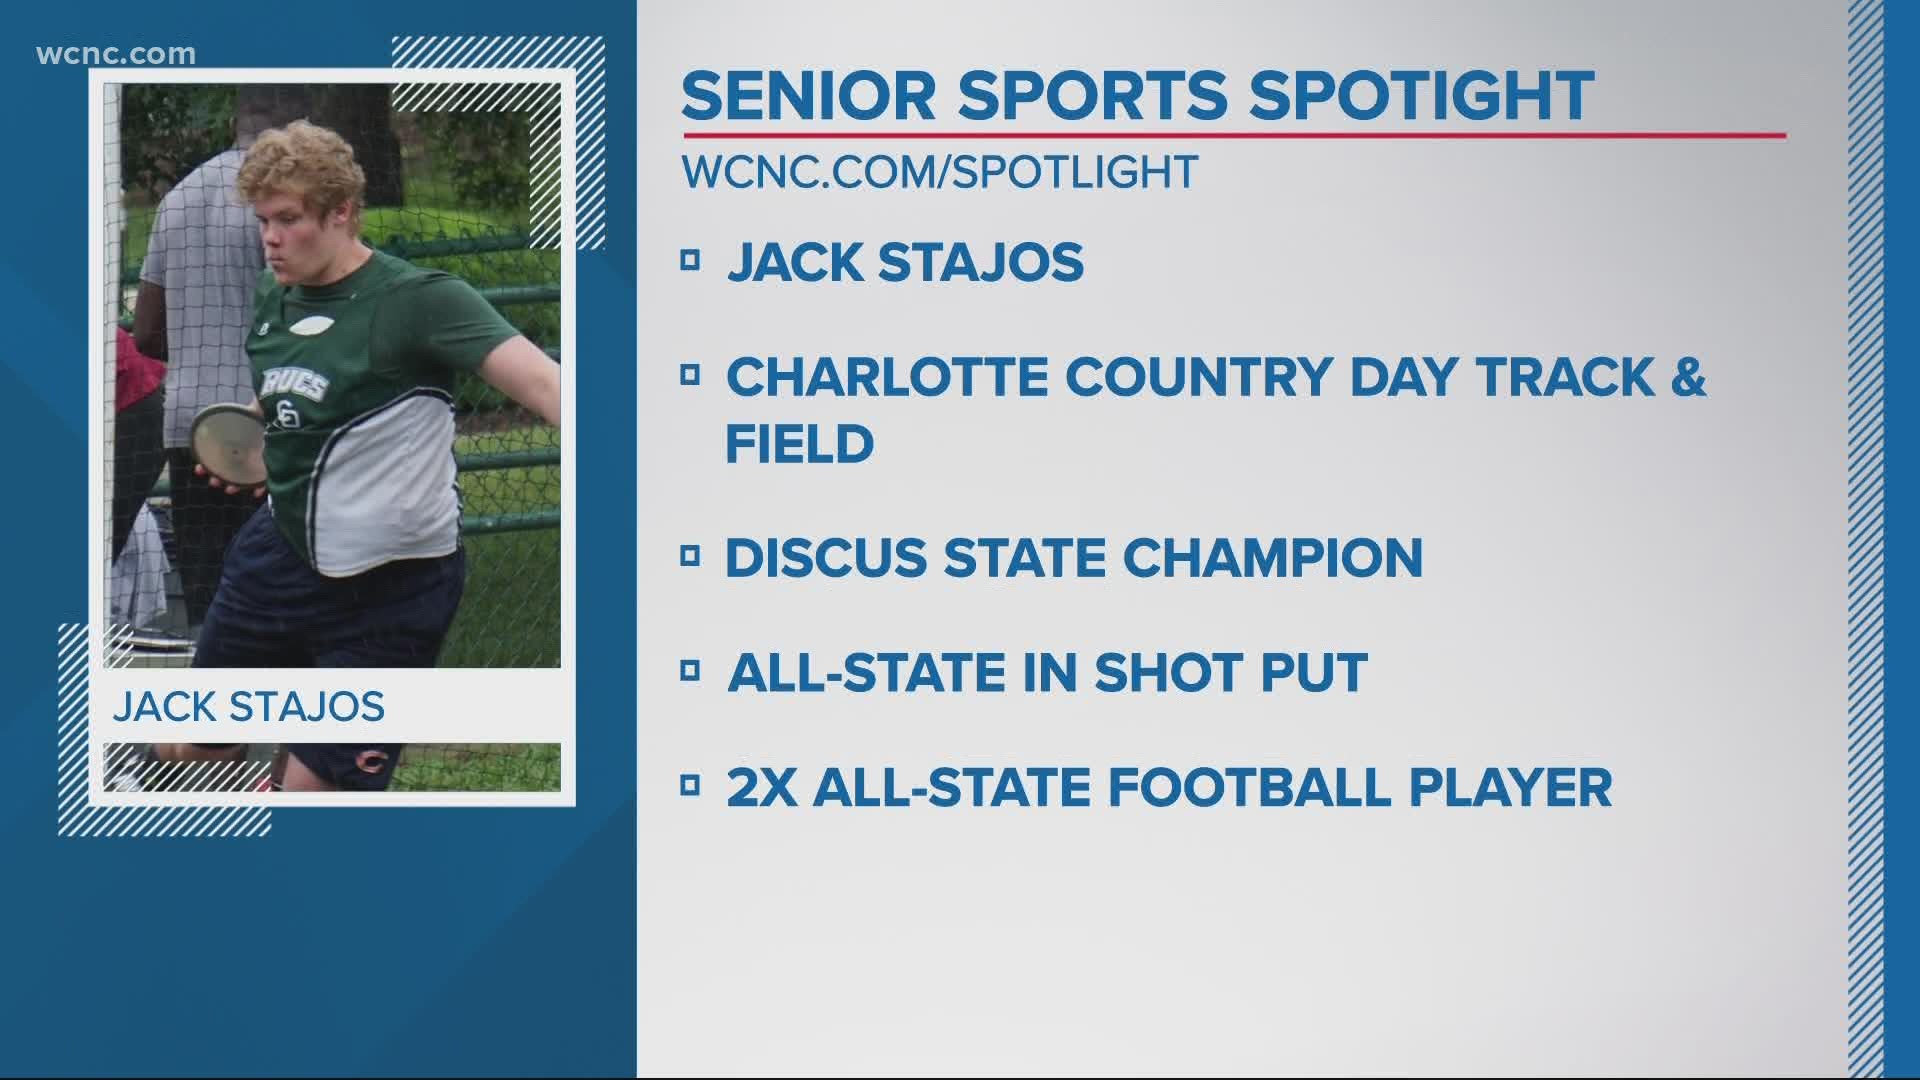 The spotlight is on Jack Stajos from Charlotte Country Day. He is a 2X all-state football player, discus champion, and won all-state in shot put.